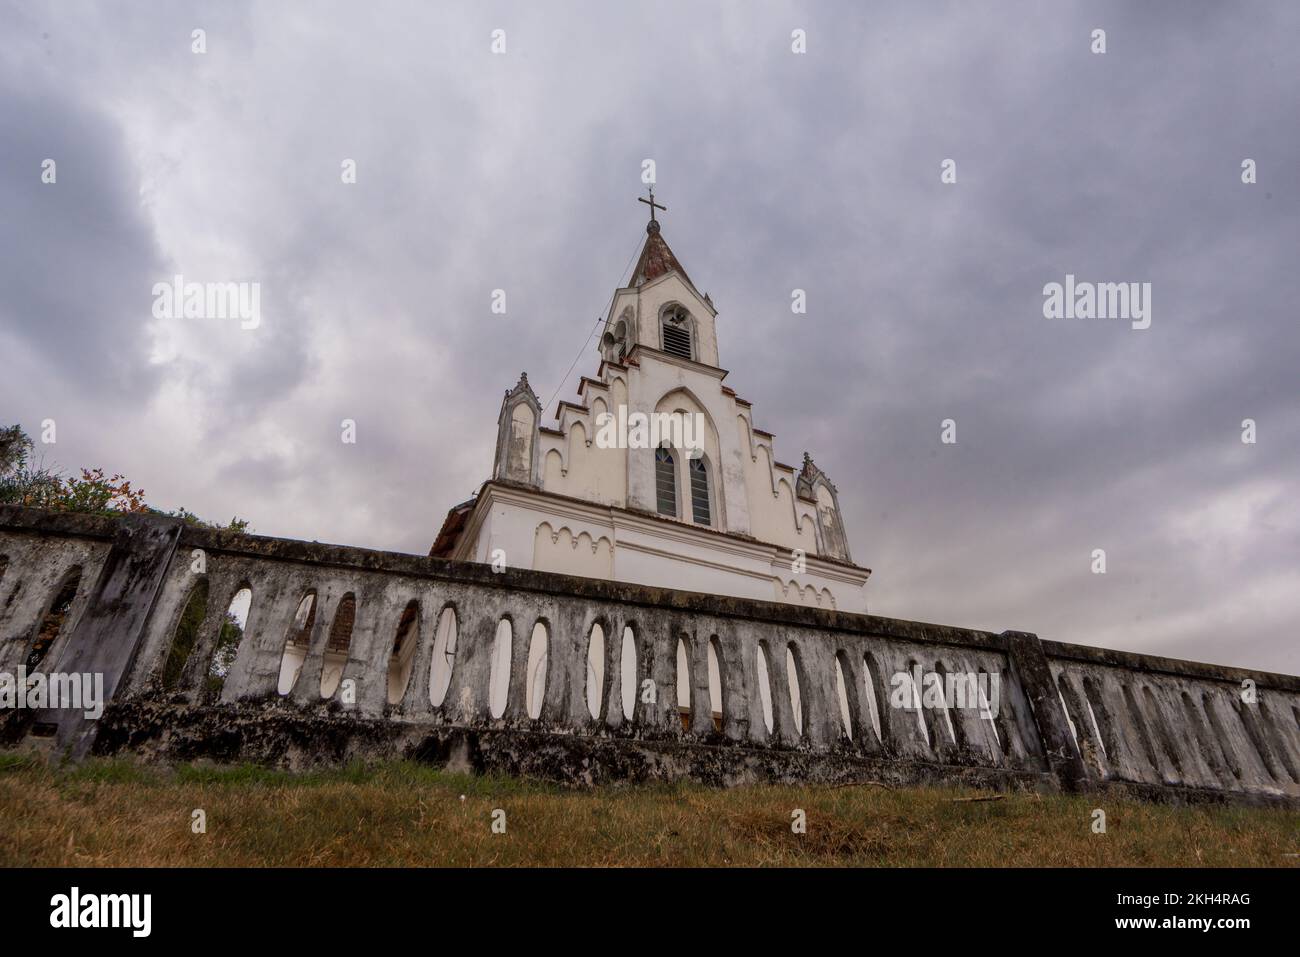 Catholic Church on the Hill in Santa Leopoldina Town on a Cloudy Day Stock Photo